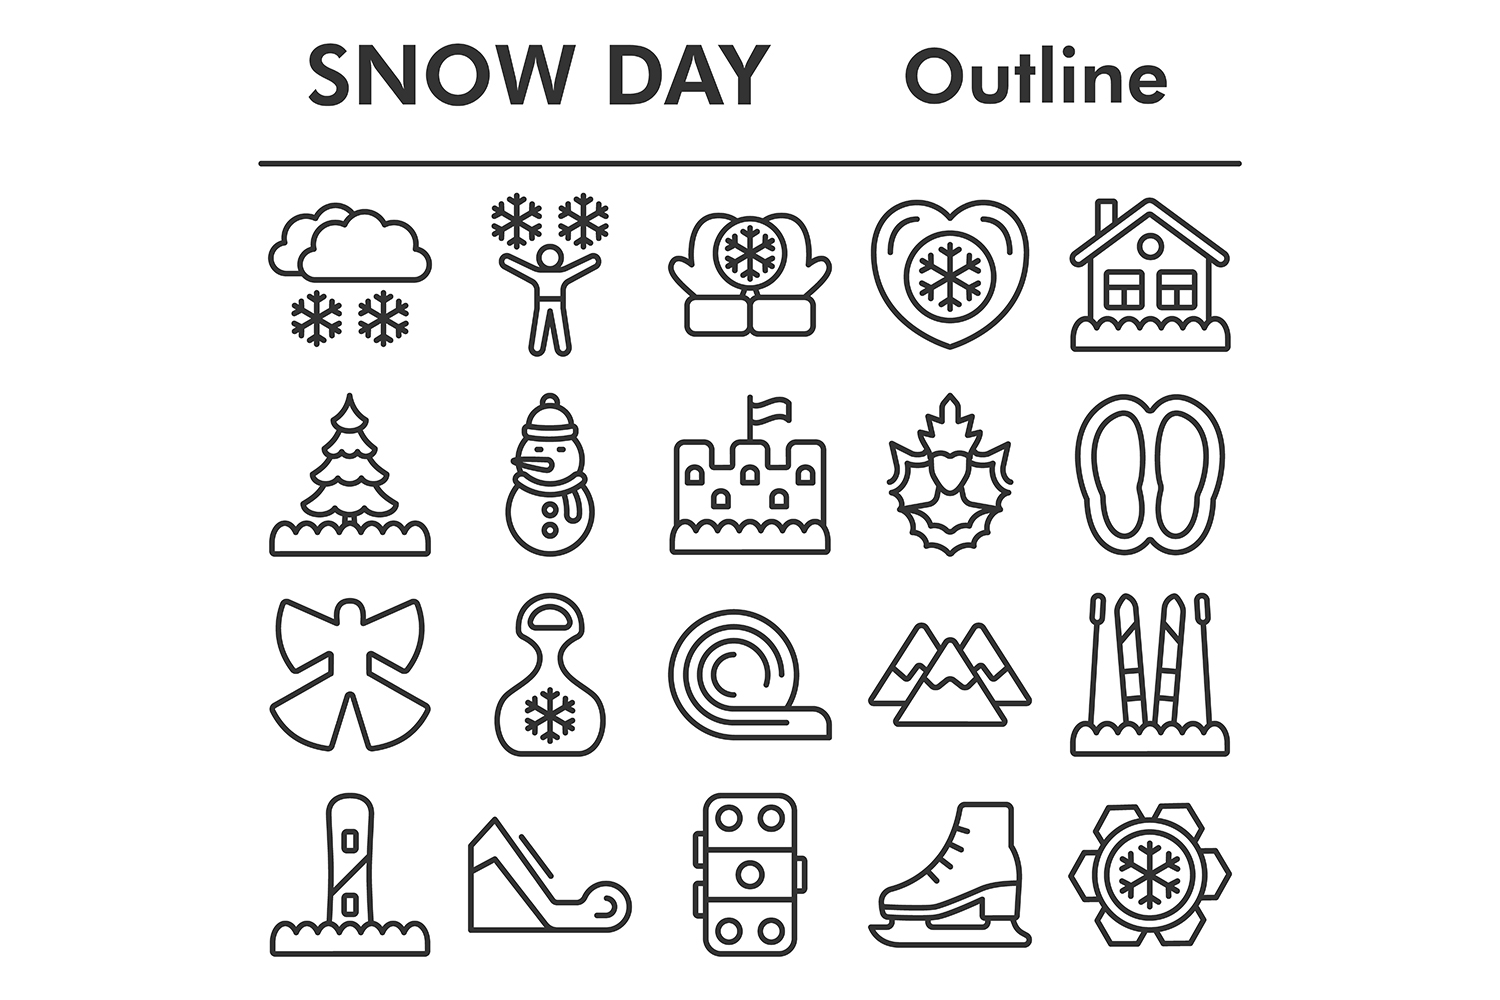 Snow day icons set, outline style pinterest preview image.